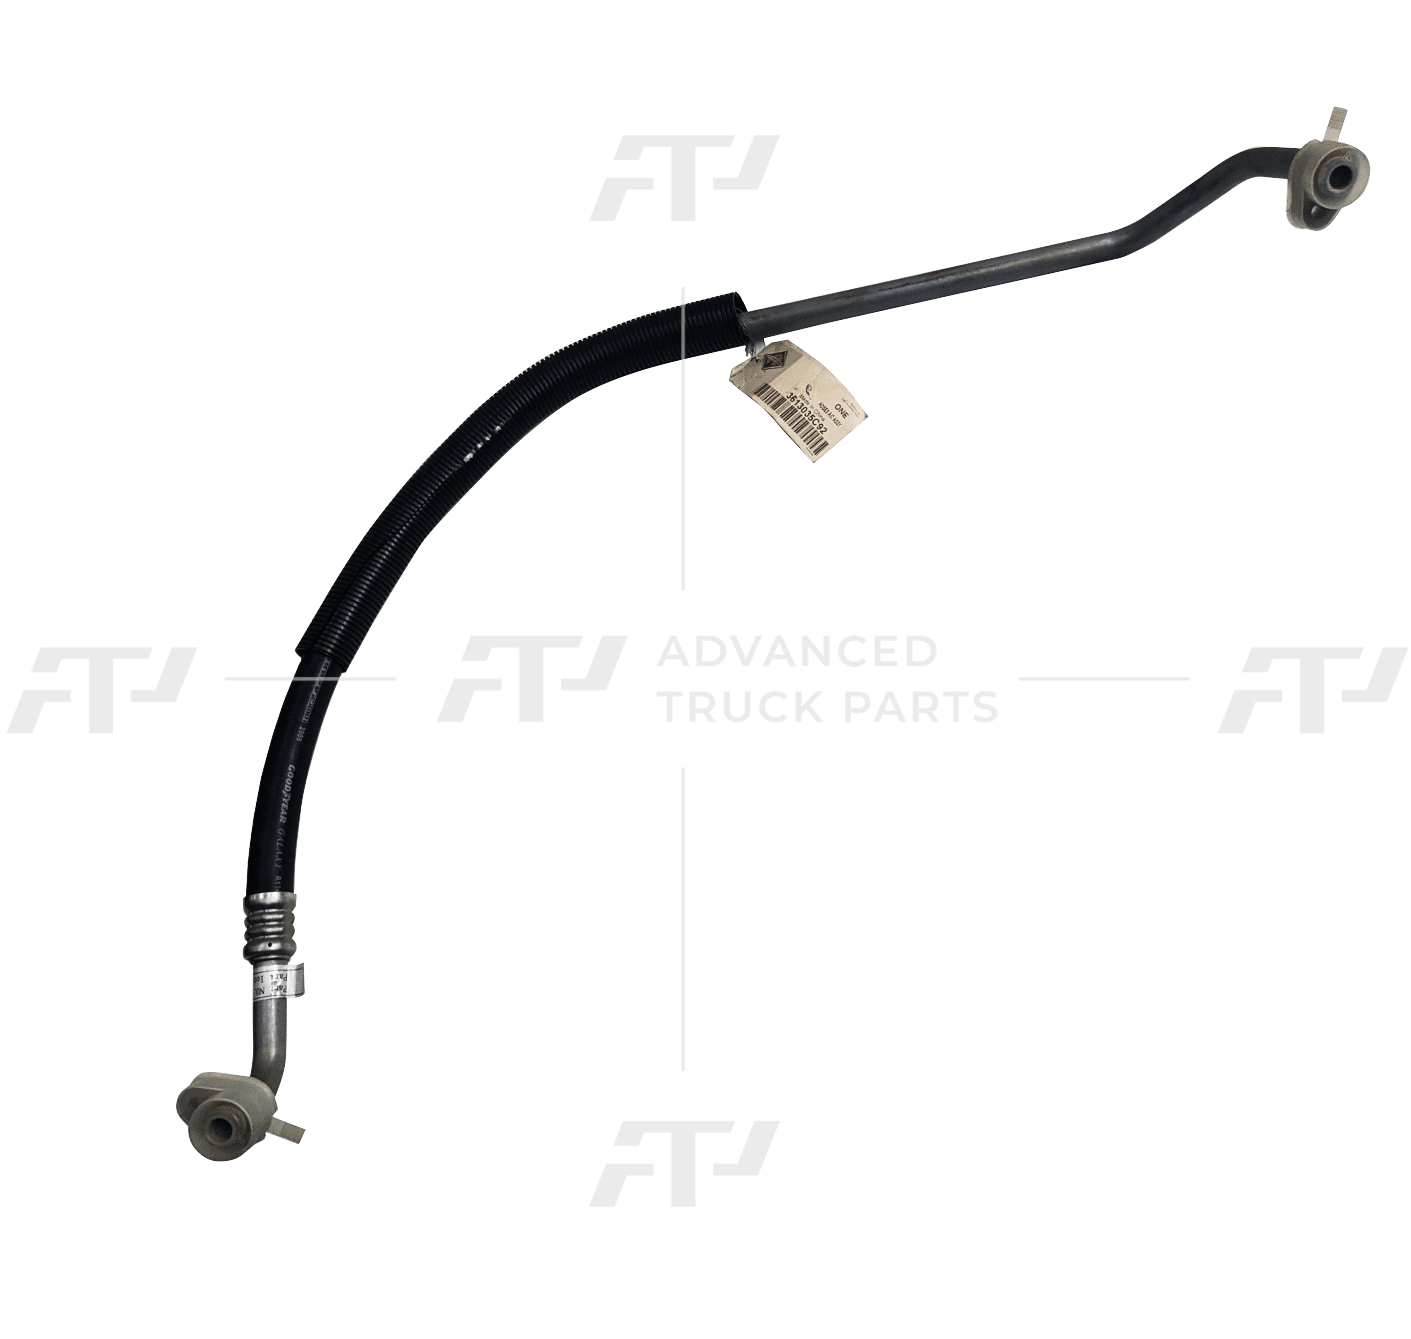 3613035C92 Genuine International Discharge Hose Assembly - ADVANCED TRUCK PARTS